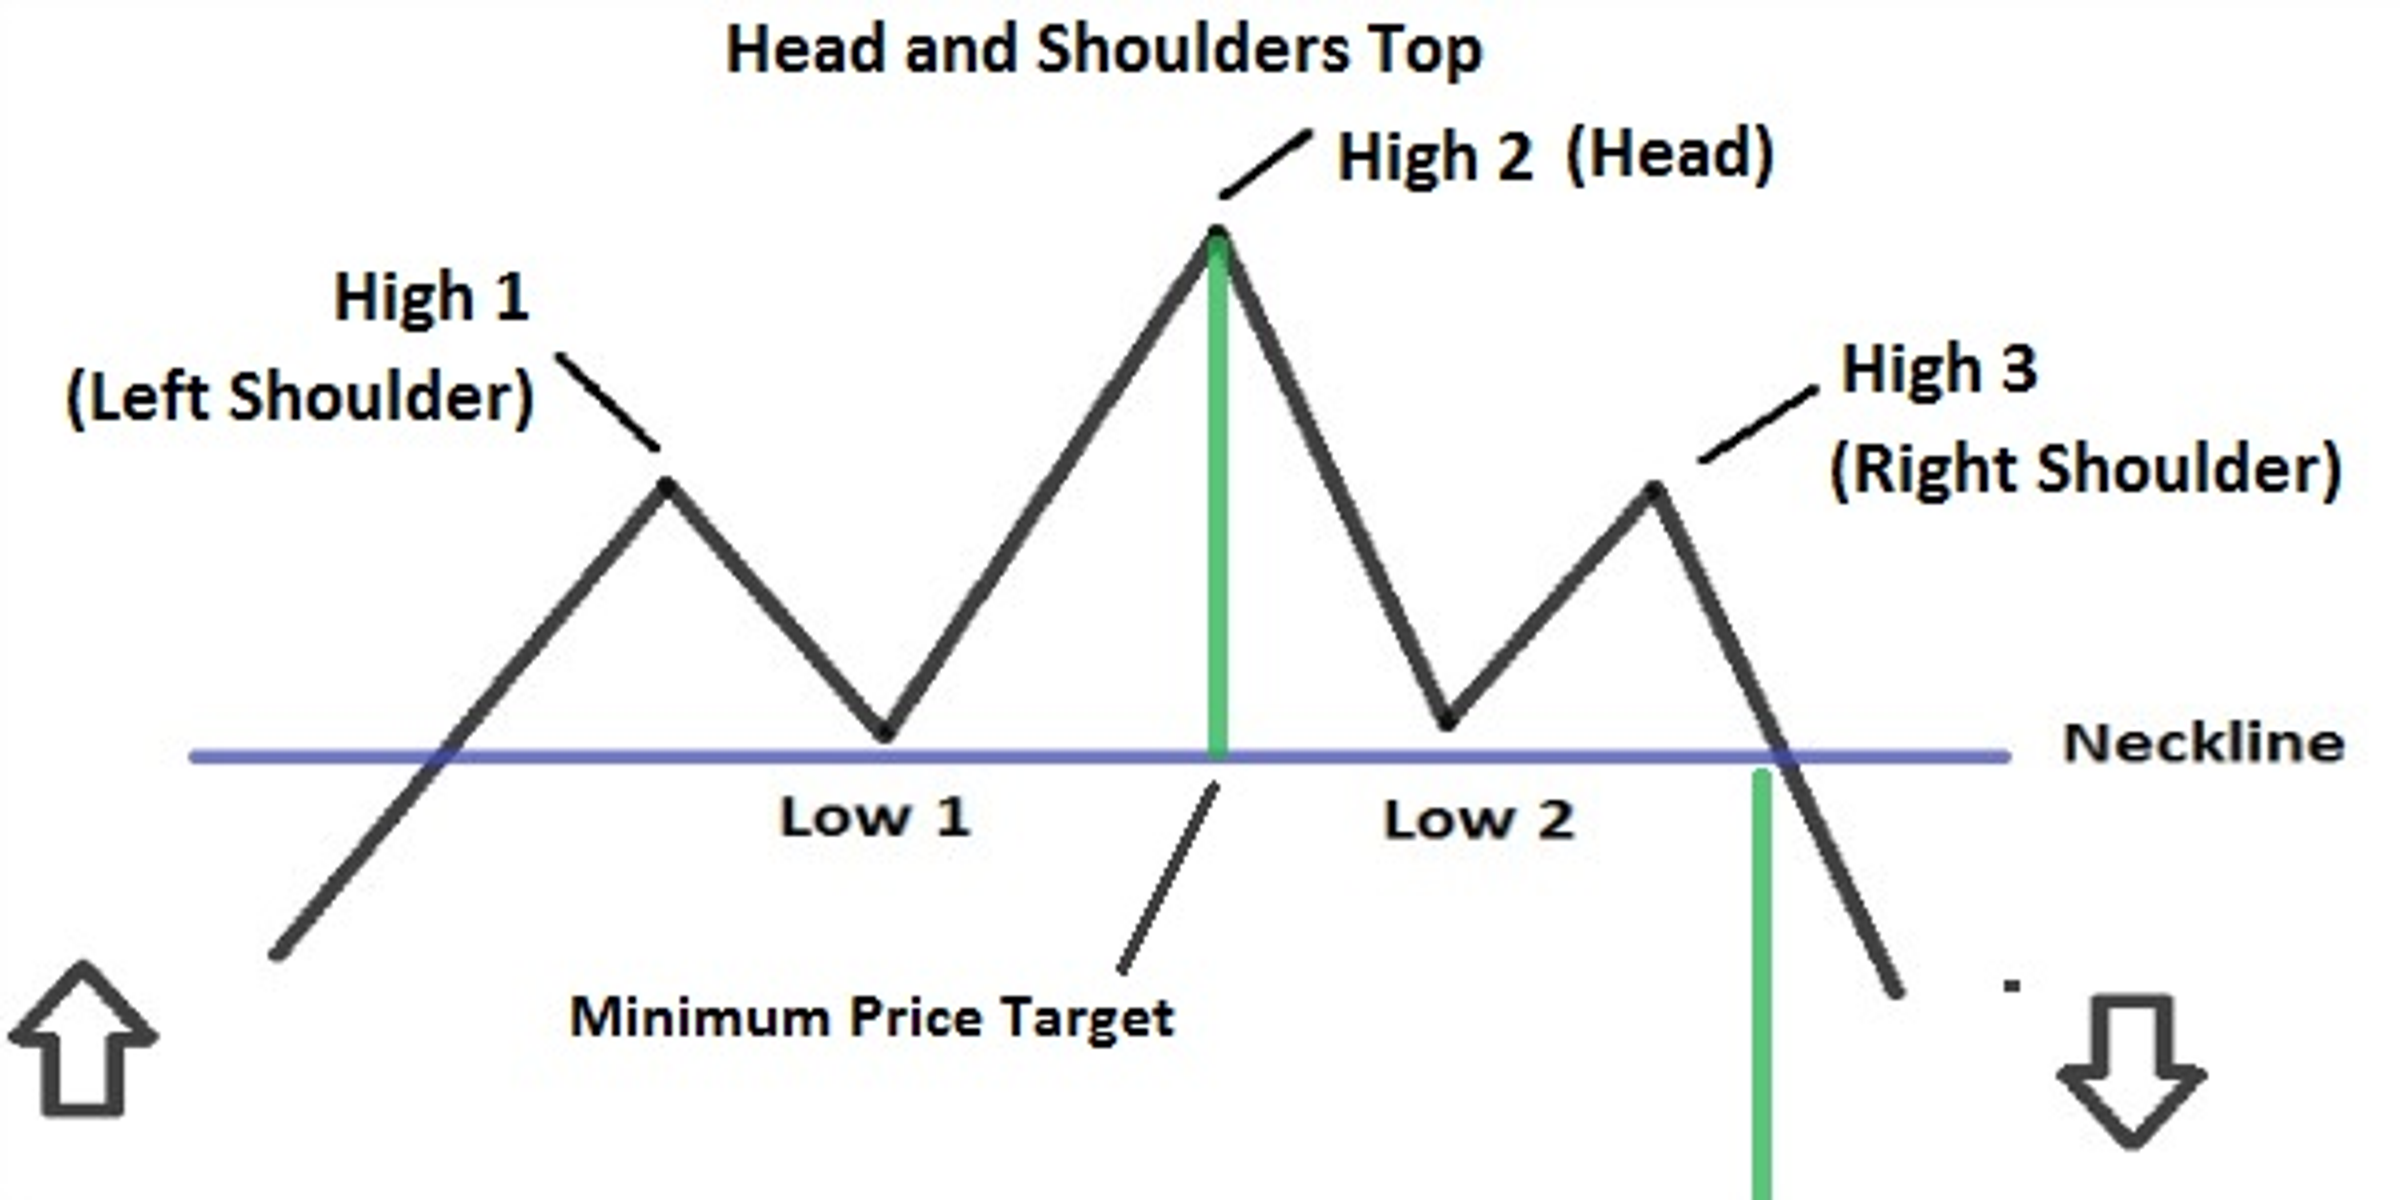 Schematic of a bearish head and shoulders top pattern.